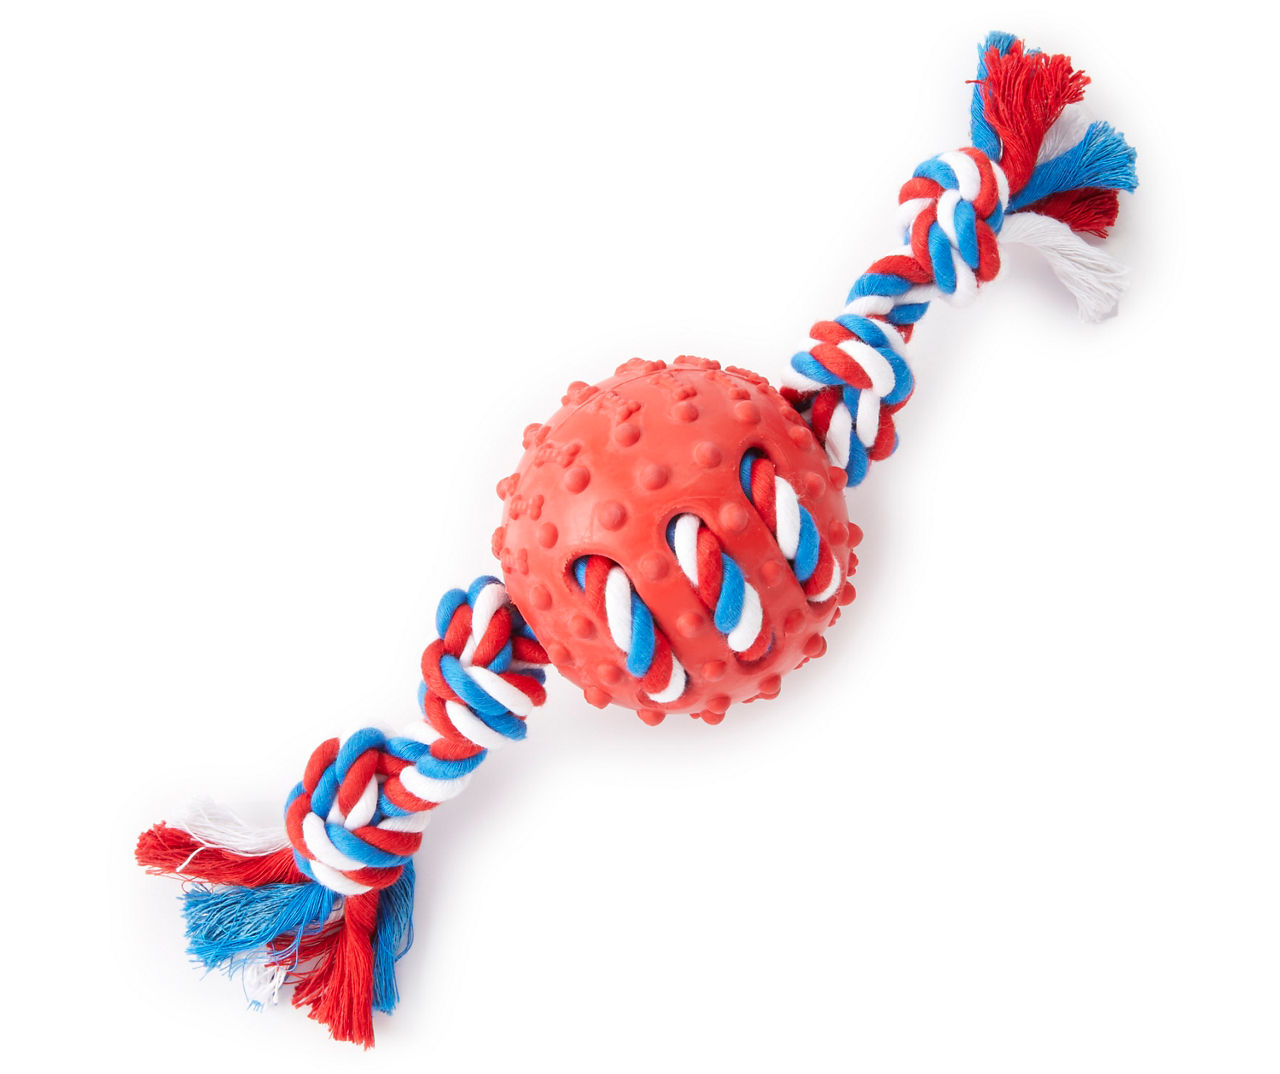 AKC Select Rope & Rubber Dog Chew Toy